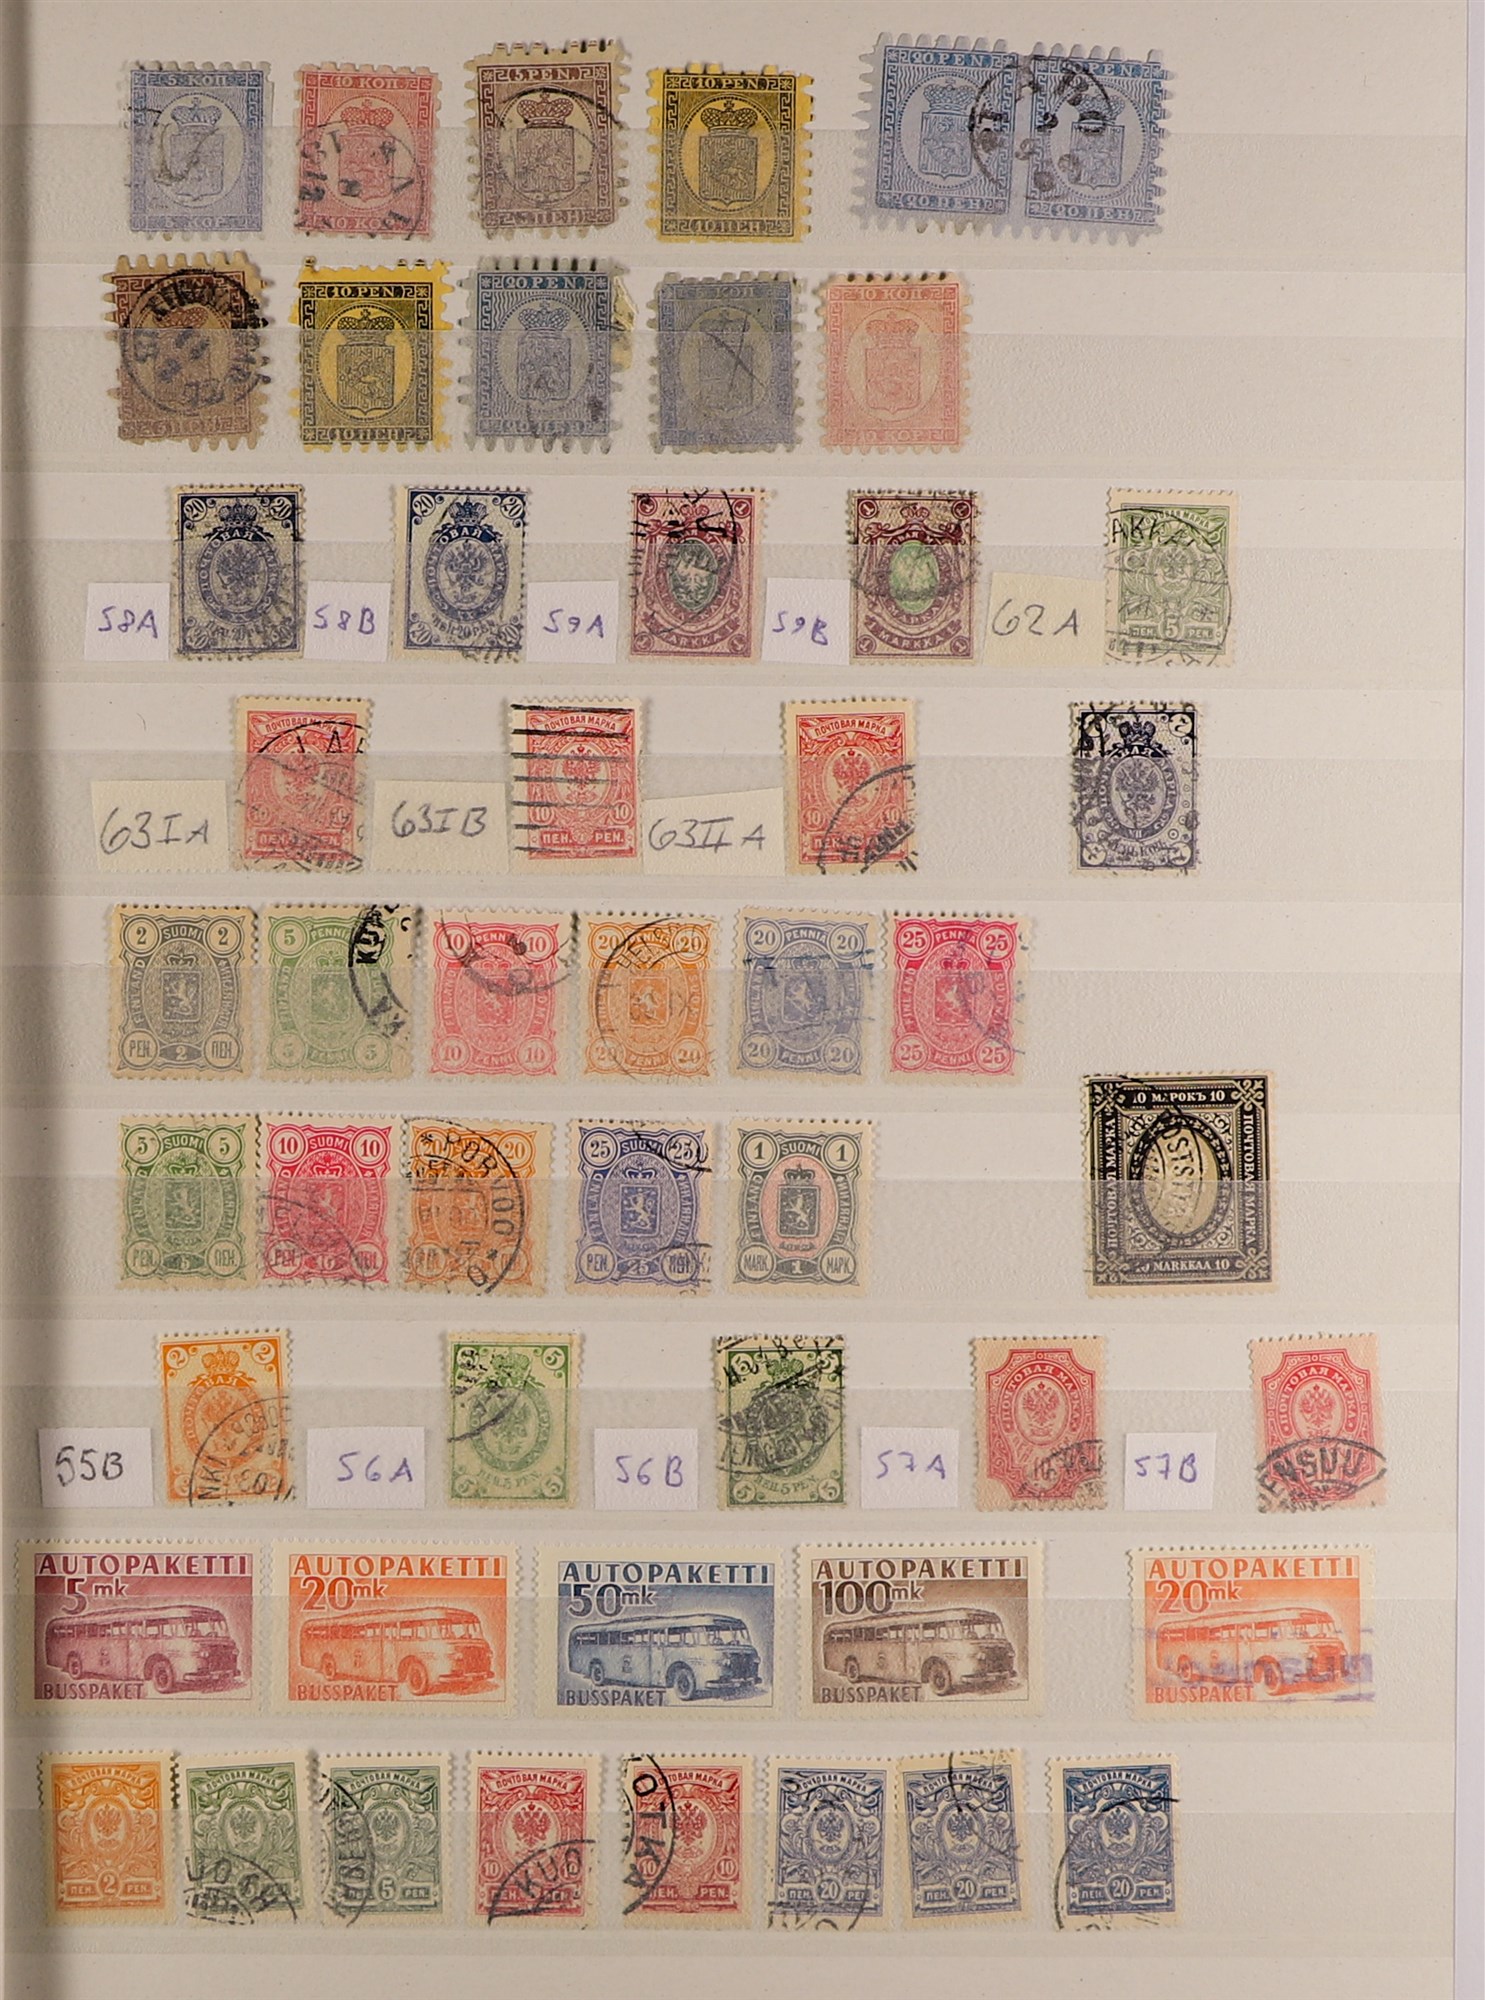 FINLAND 1860 - 2010's ACCUMULATION IN CARTON of mint / never hinged mint & used stamps and miniature